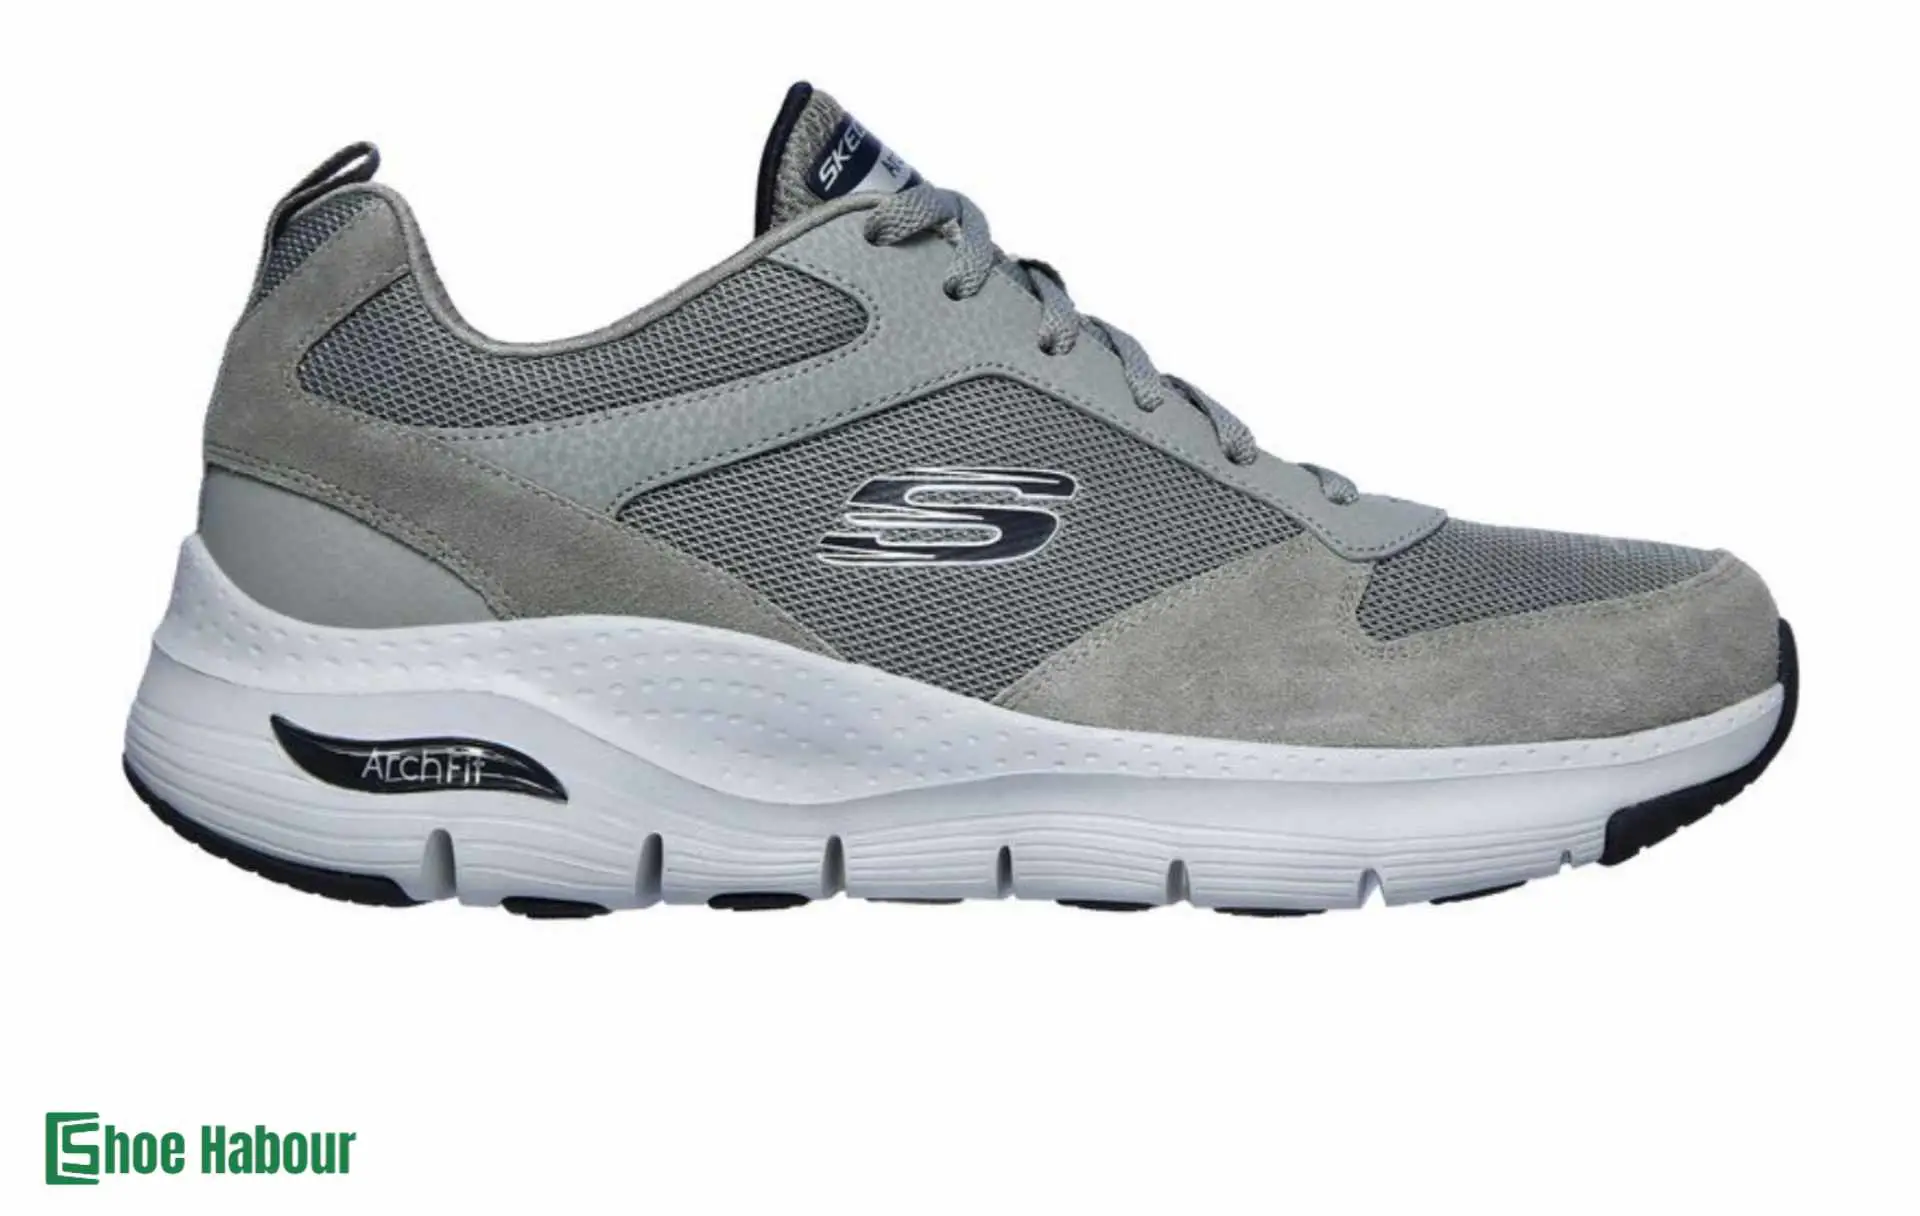 Skechers arch fit reviews